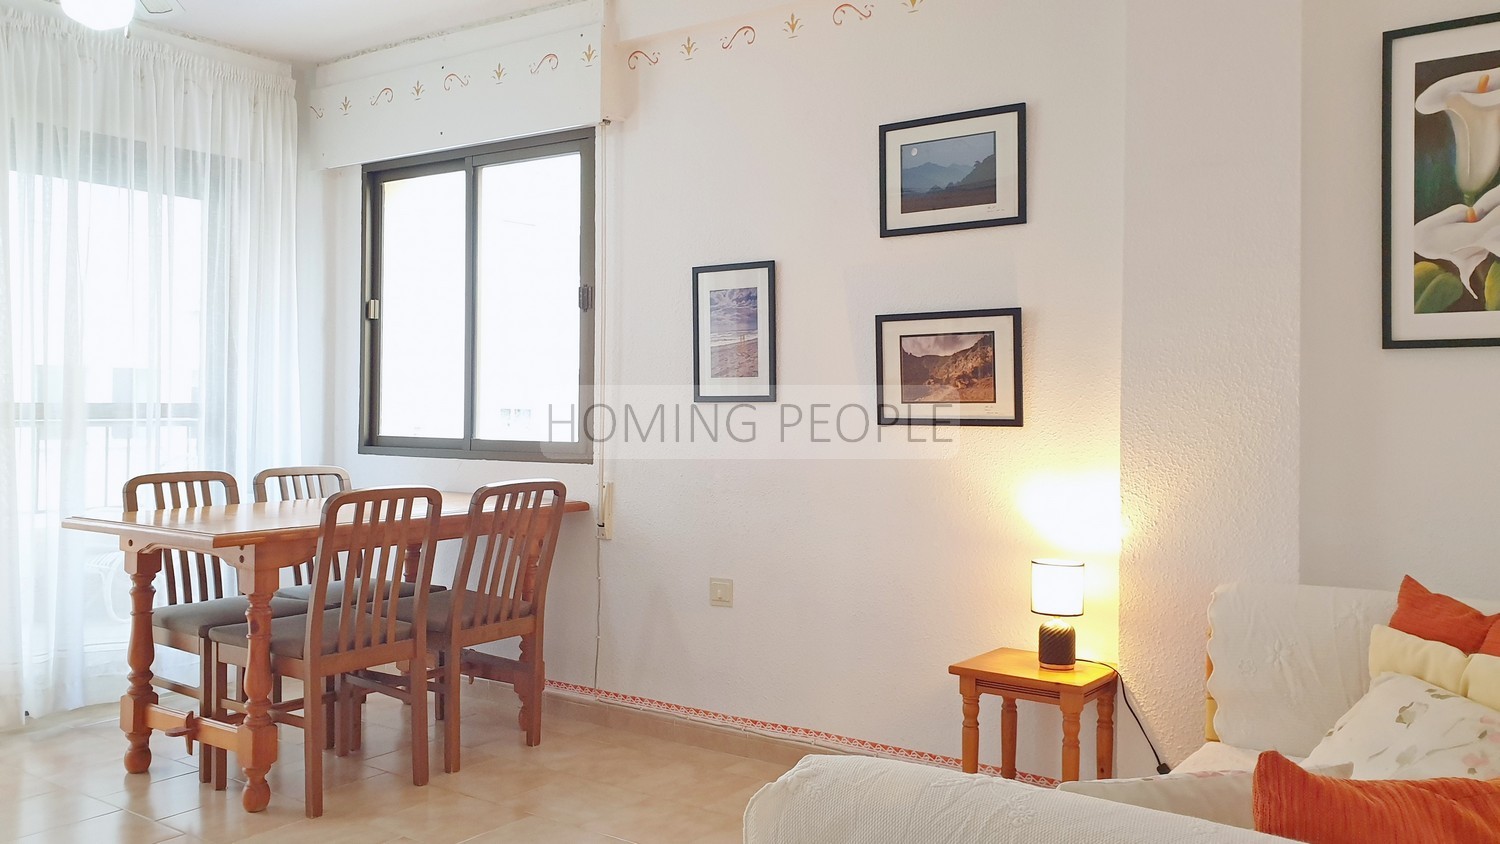 [SOLD]: Bright apartment in seafront building with swimming pool and parking space